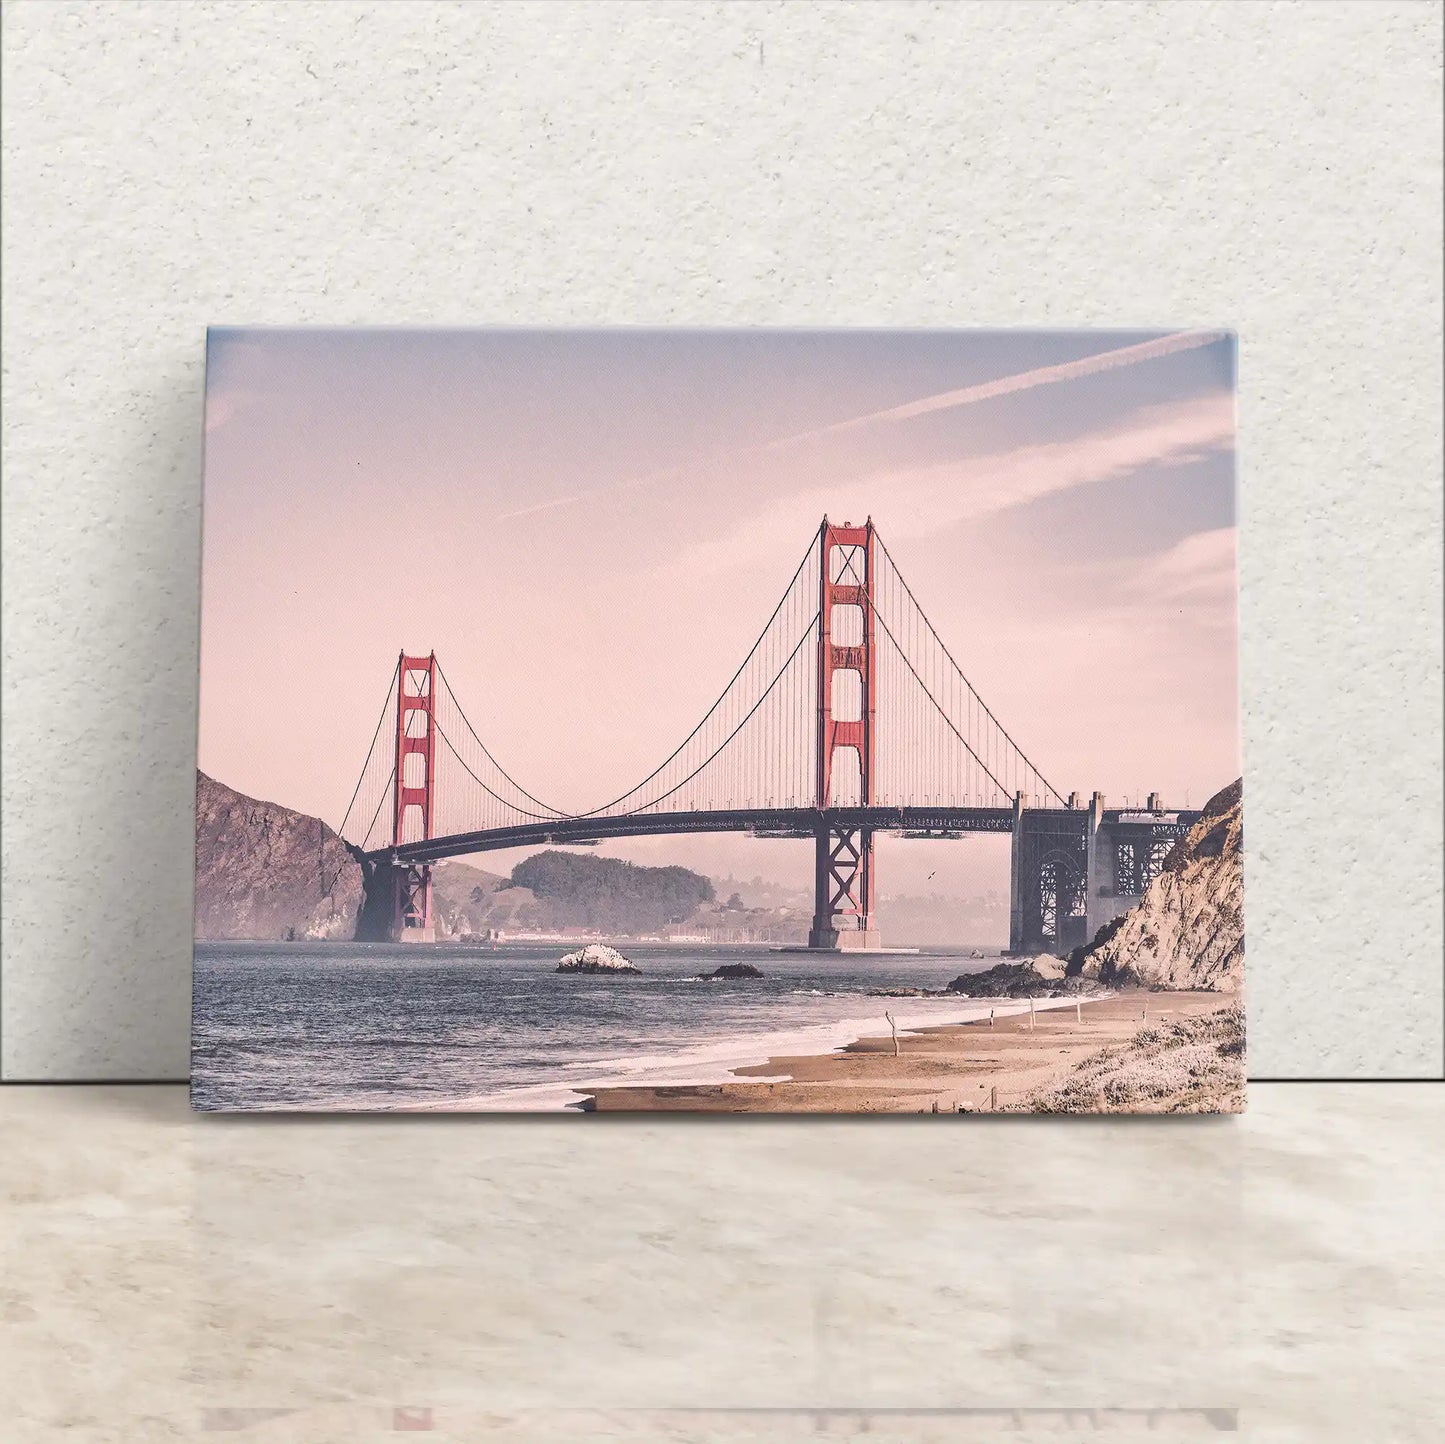 A canvas print leaning against a wall with a vintage-style photograph of the Golden Gate Bridge in soft pink hues, with a clear sky and calm waters.